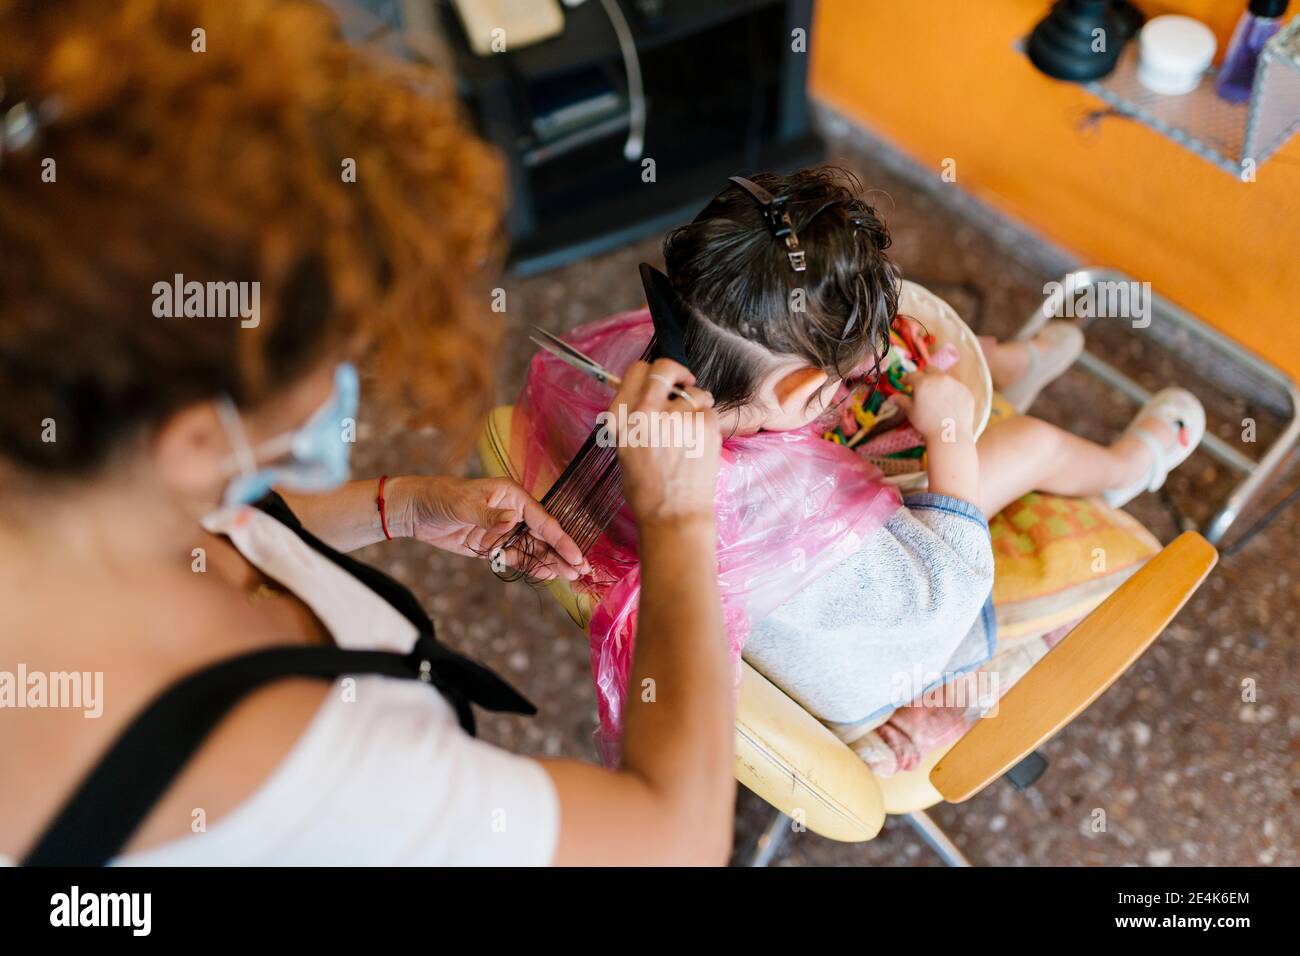 Hairdresser cutting wet hair of flittle girl searching clips in basket Stock Photo